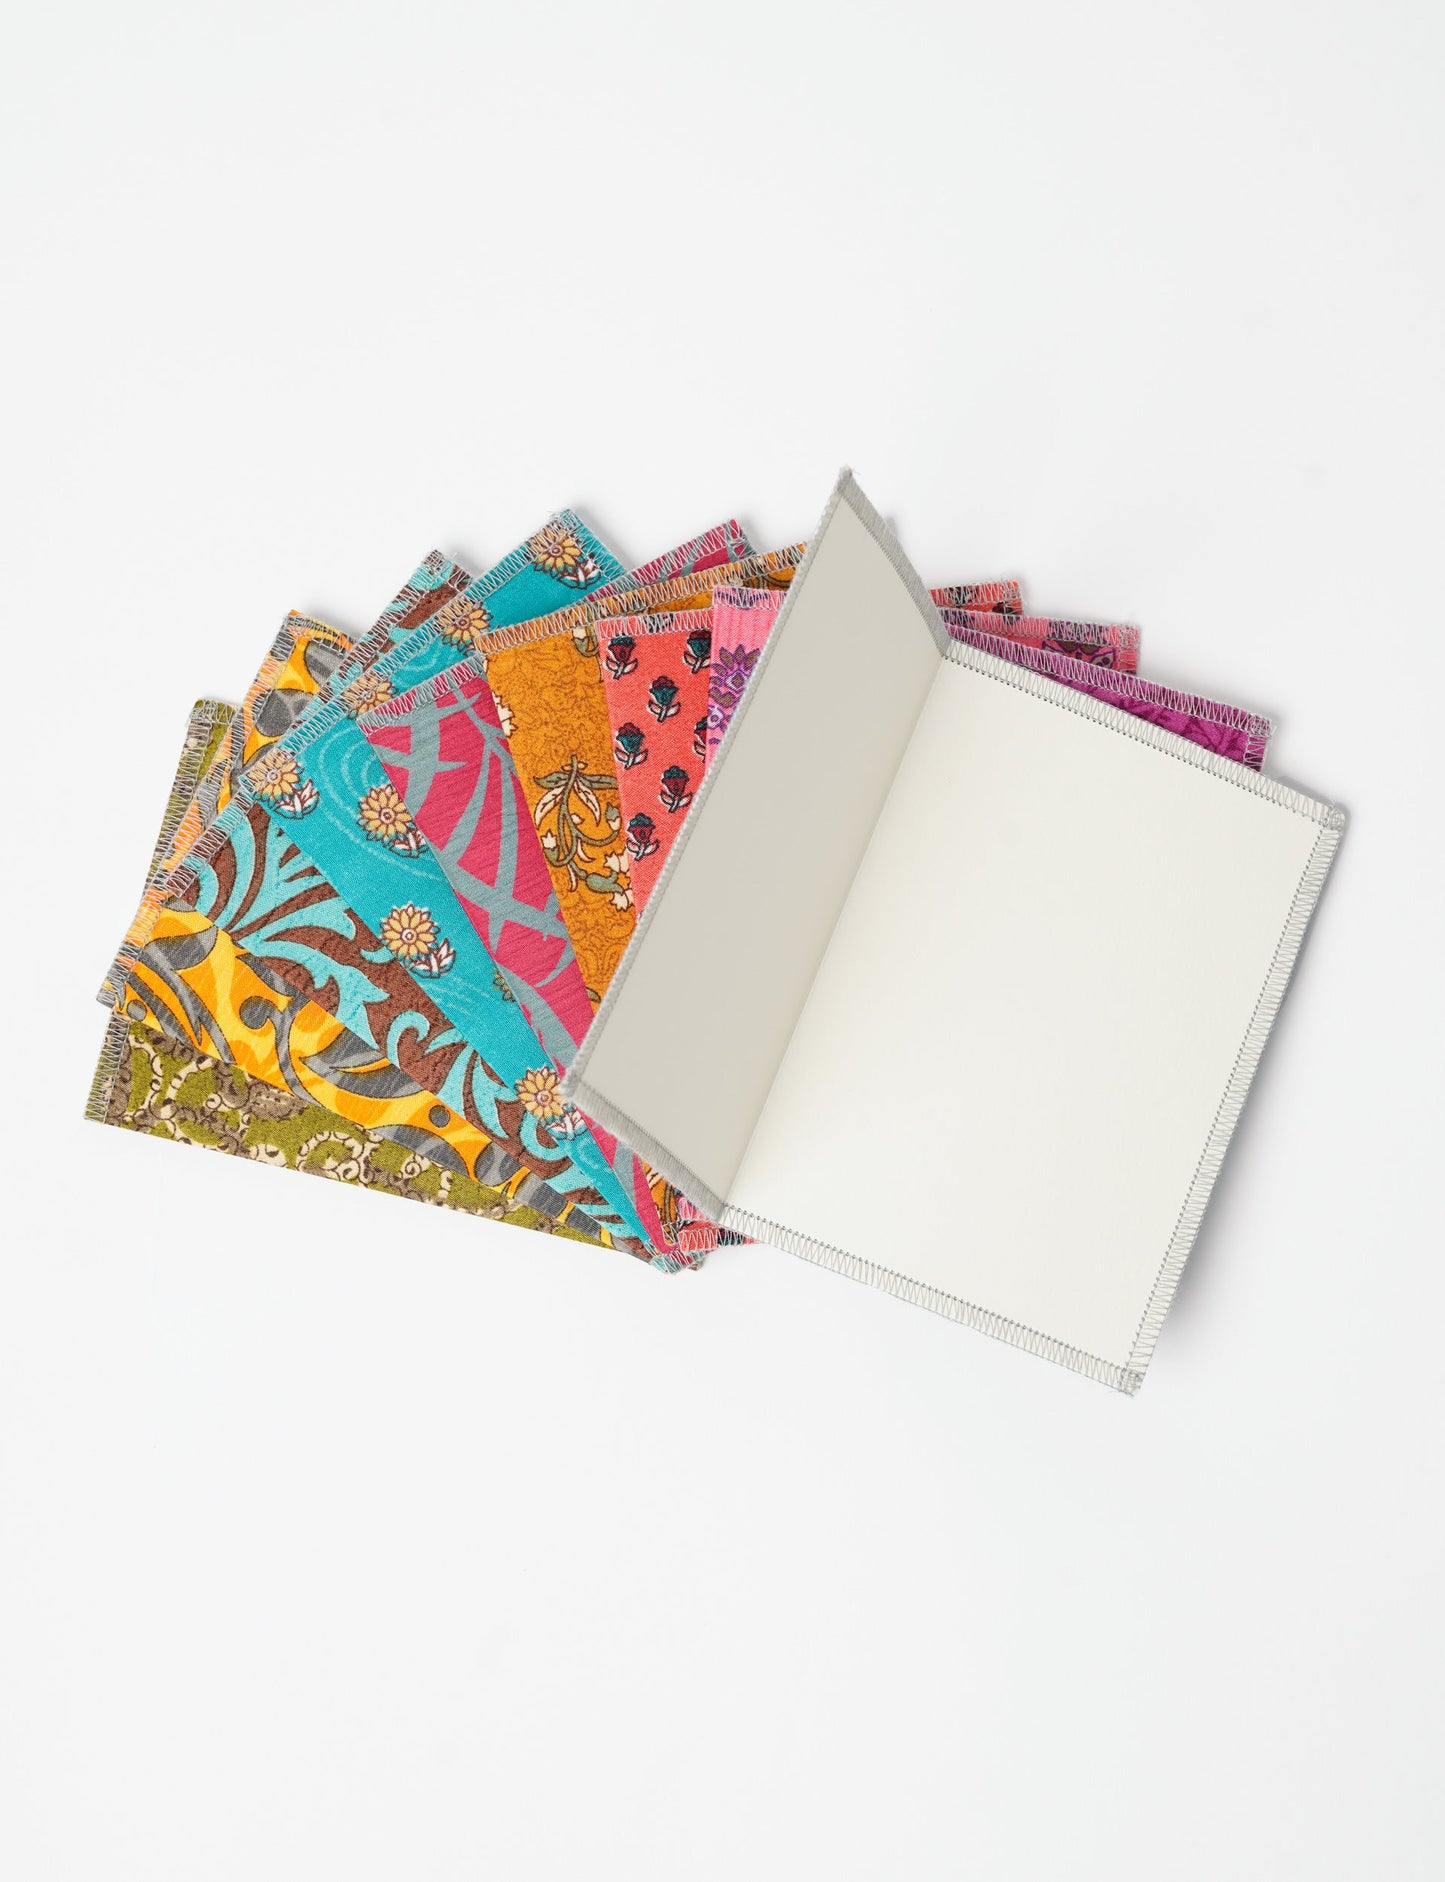 Sustainably crafted FOLDED POSTCARD SET, 10 assorted pieces made with 100% recycled paper and printed sari fabric sourced from Mumbai markets. Eco-friendly with contrast overlock edging. Envelopes included for eco-conscious gratitude and cheerful messages to loved ones.